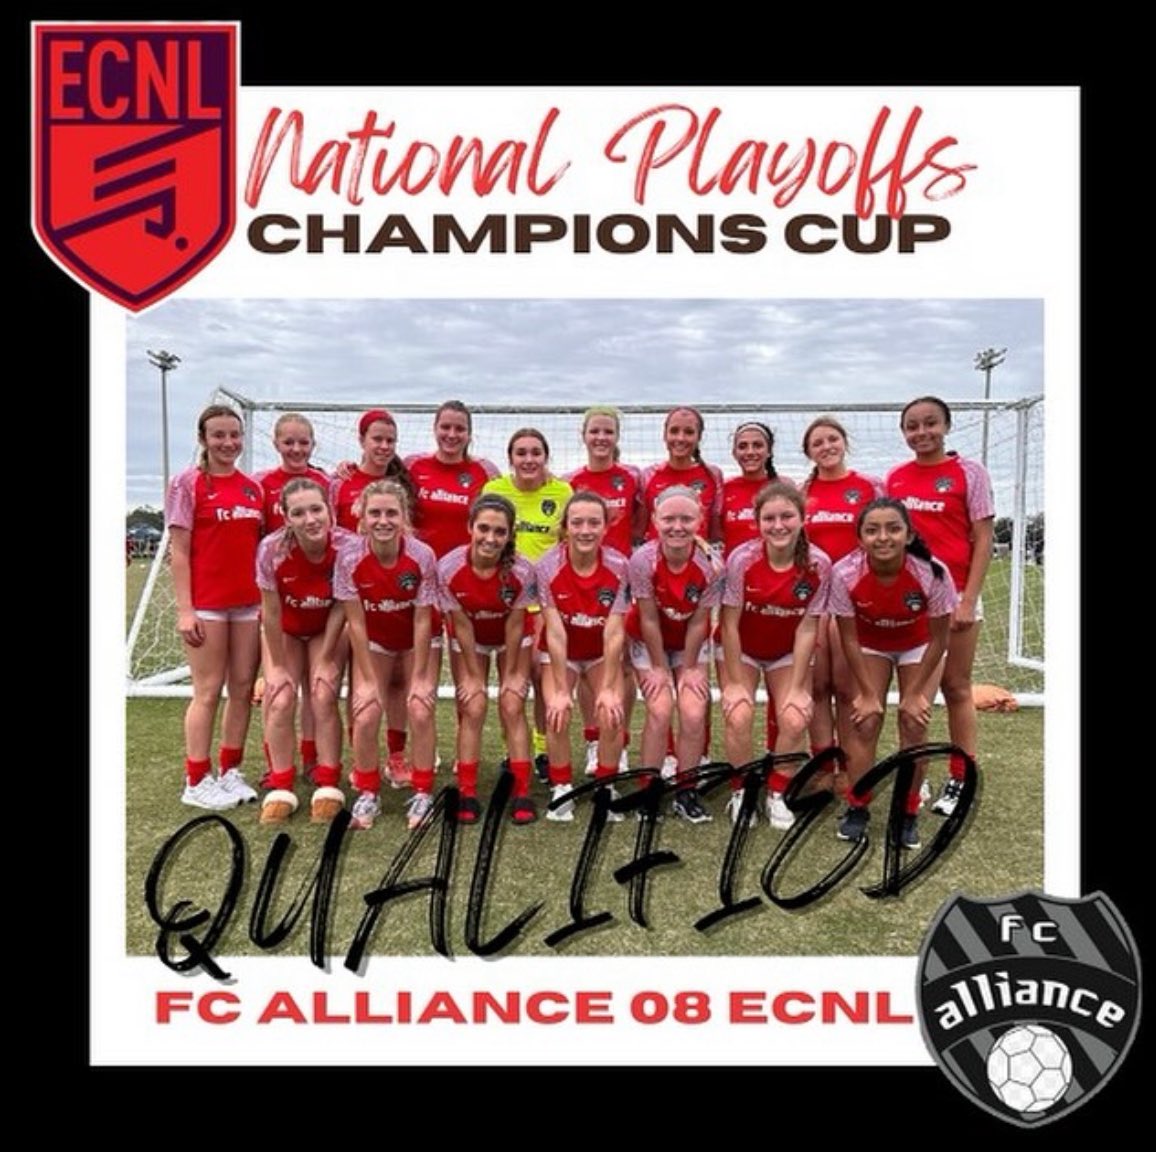 Let’s GO!!! 🔥🔥 Love this team!! @08g_fc @FCAECNL @ECNLgirls @ECNLOhioValley @ImYouthSoccer @Co11egeSoccer @ImCollegeSoccer @PrepSoccer